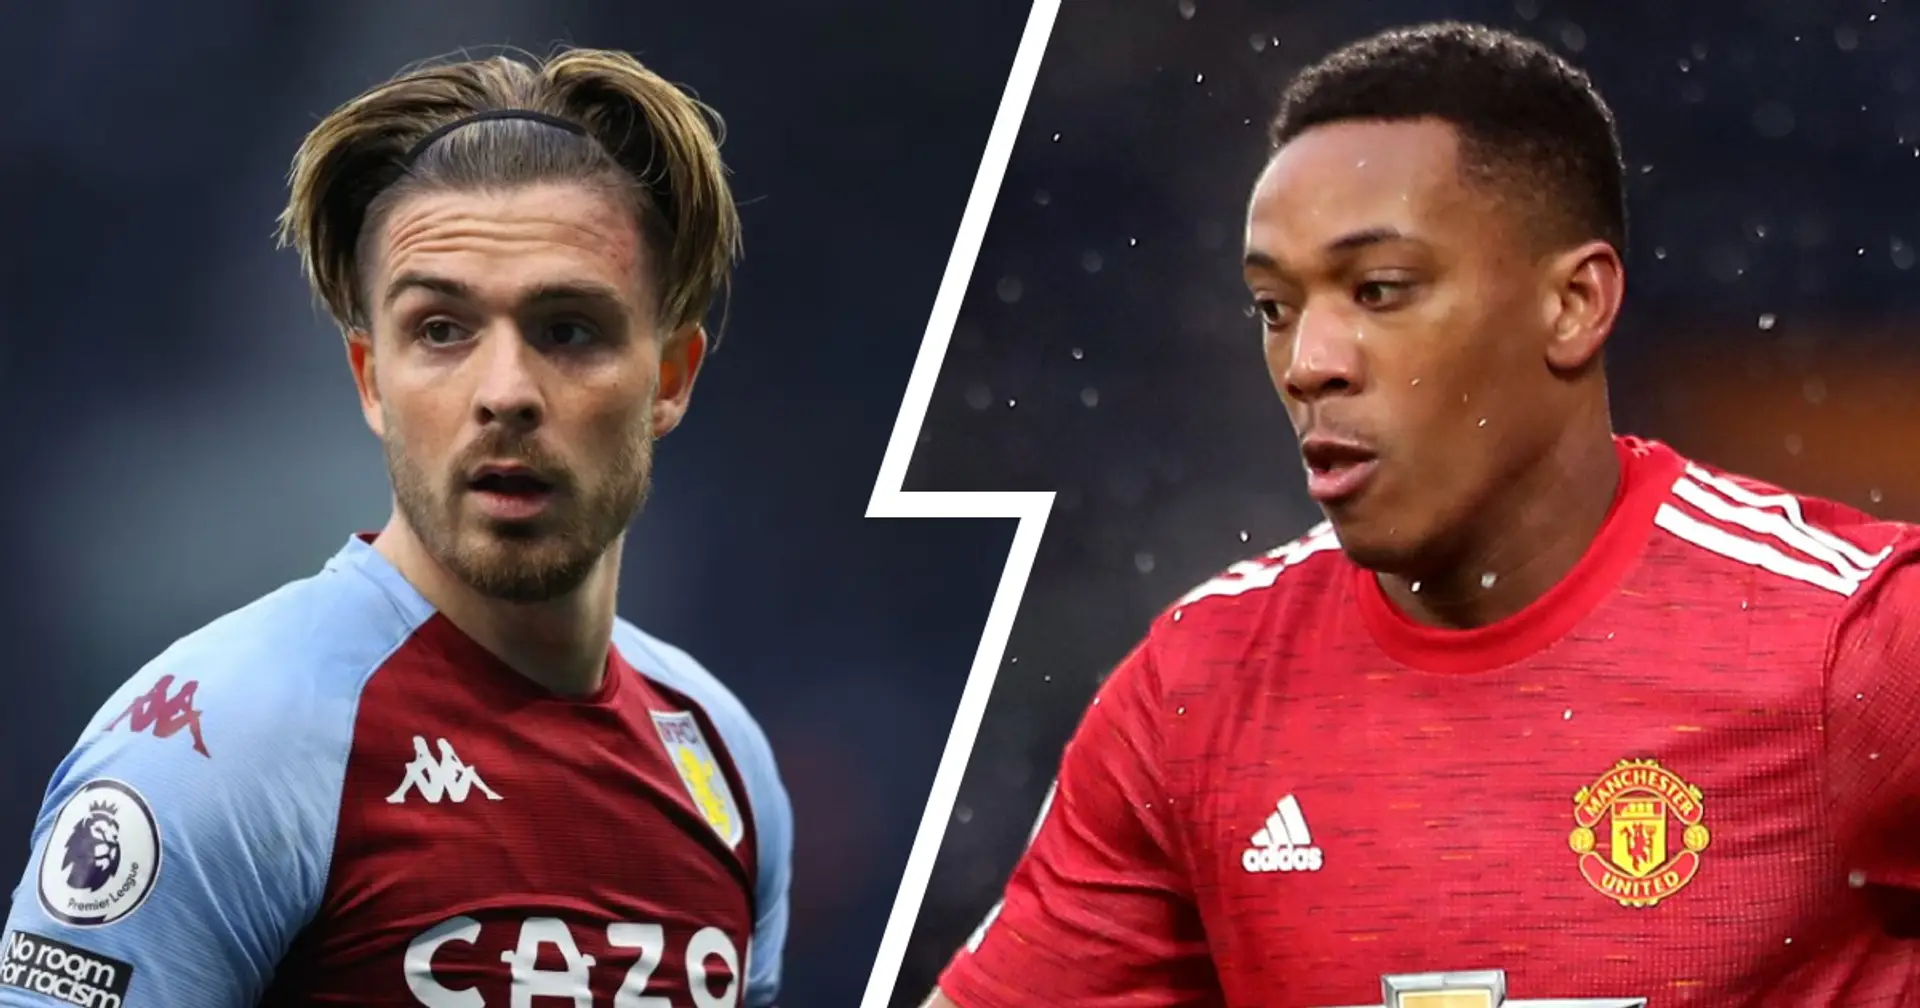 Players want Grealish, Martial could leave: latest Man United transfer round-up with probability ratings